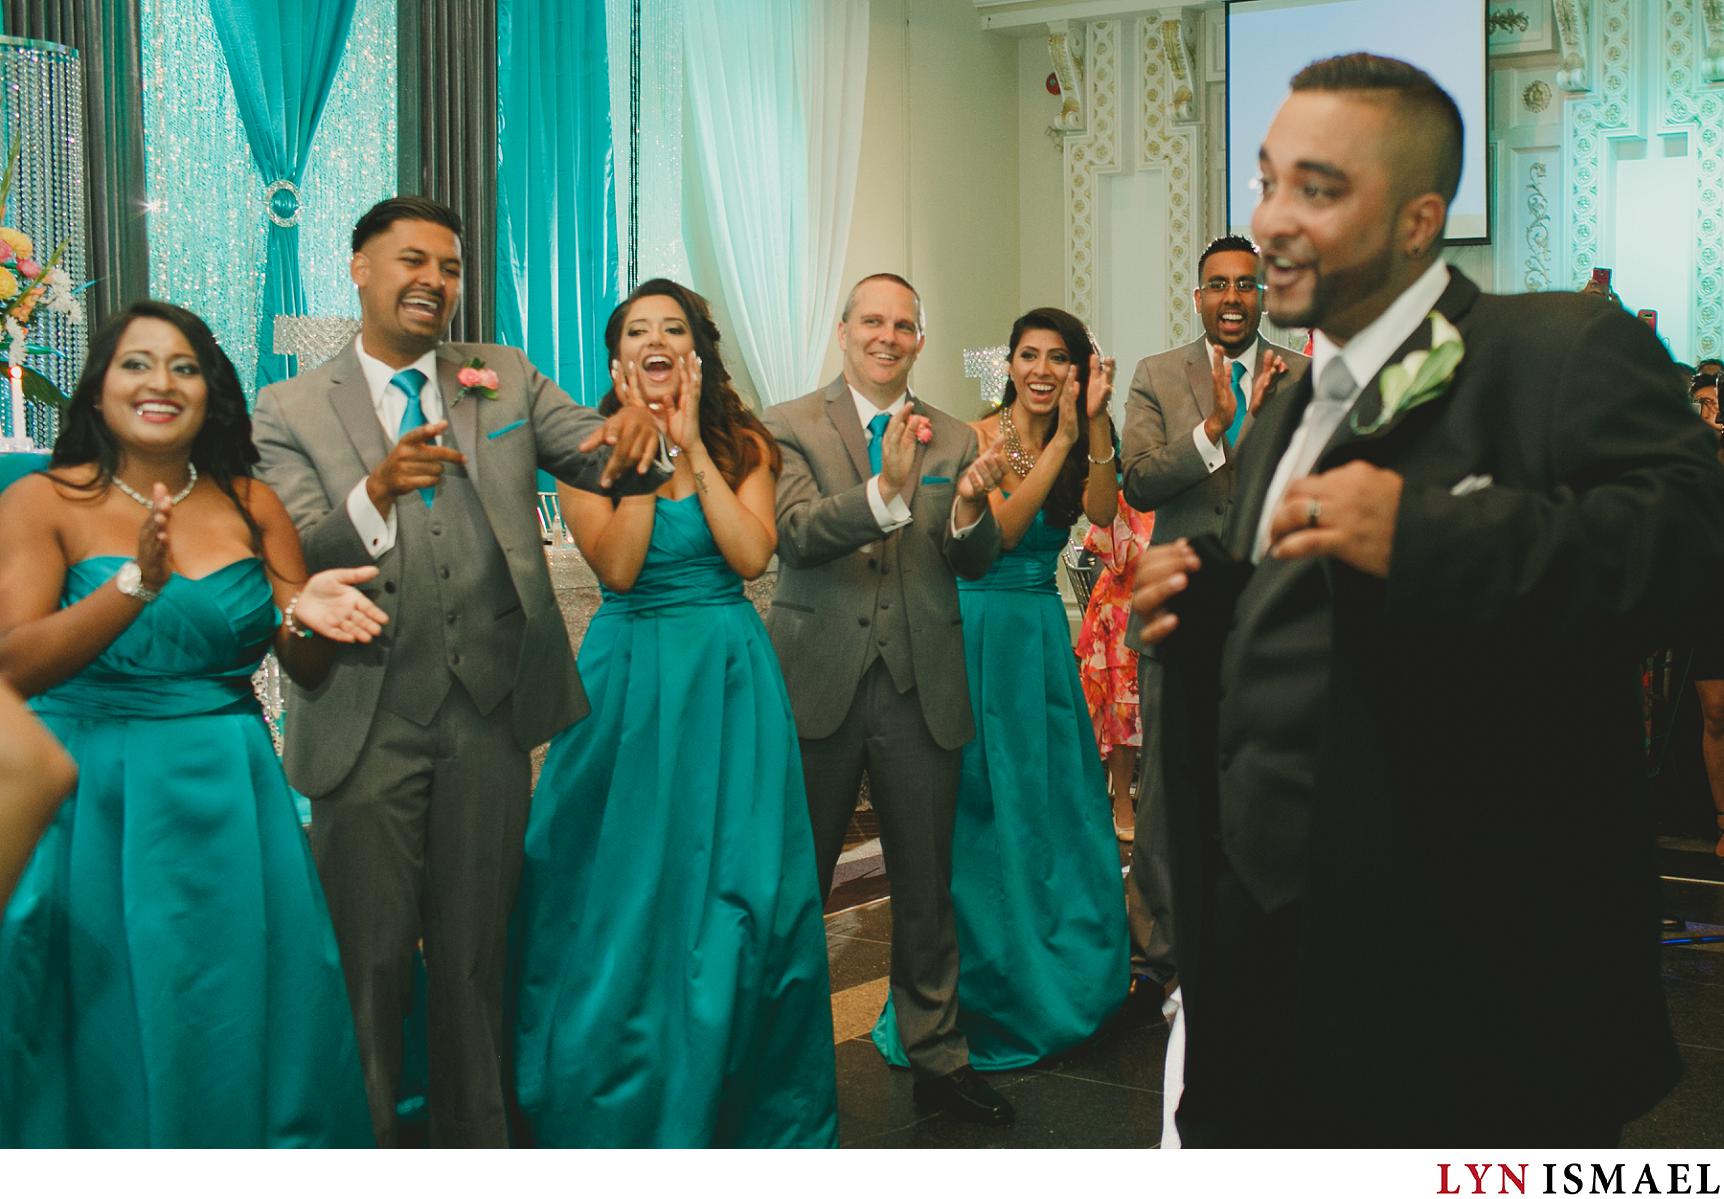 The wedding party cheers on as the bride and groom enters Paradise Banquet Hall for their wedding reception